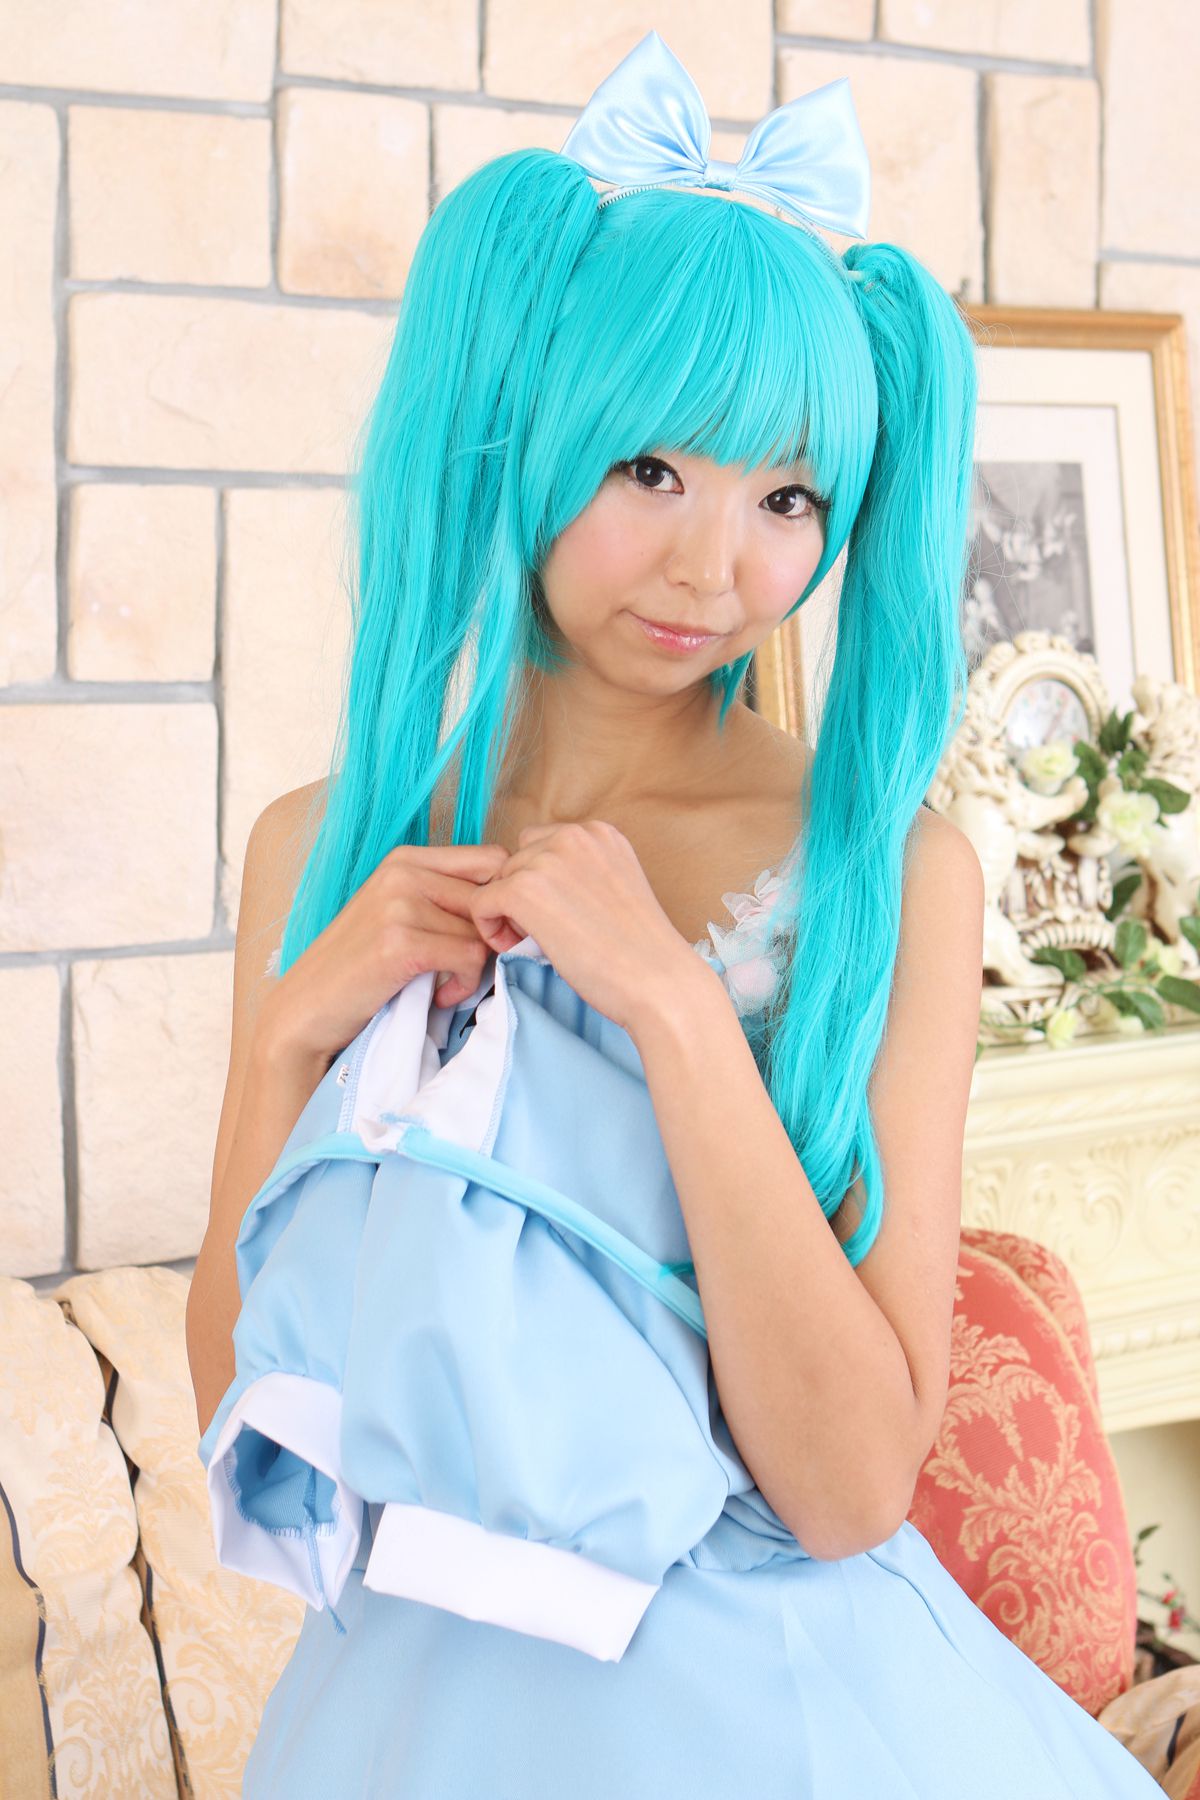 taotuhome[Cosplay套图] New Hatsune Miku from Vocaloid - So Sexy第110张